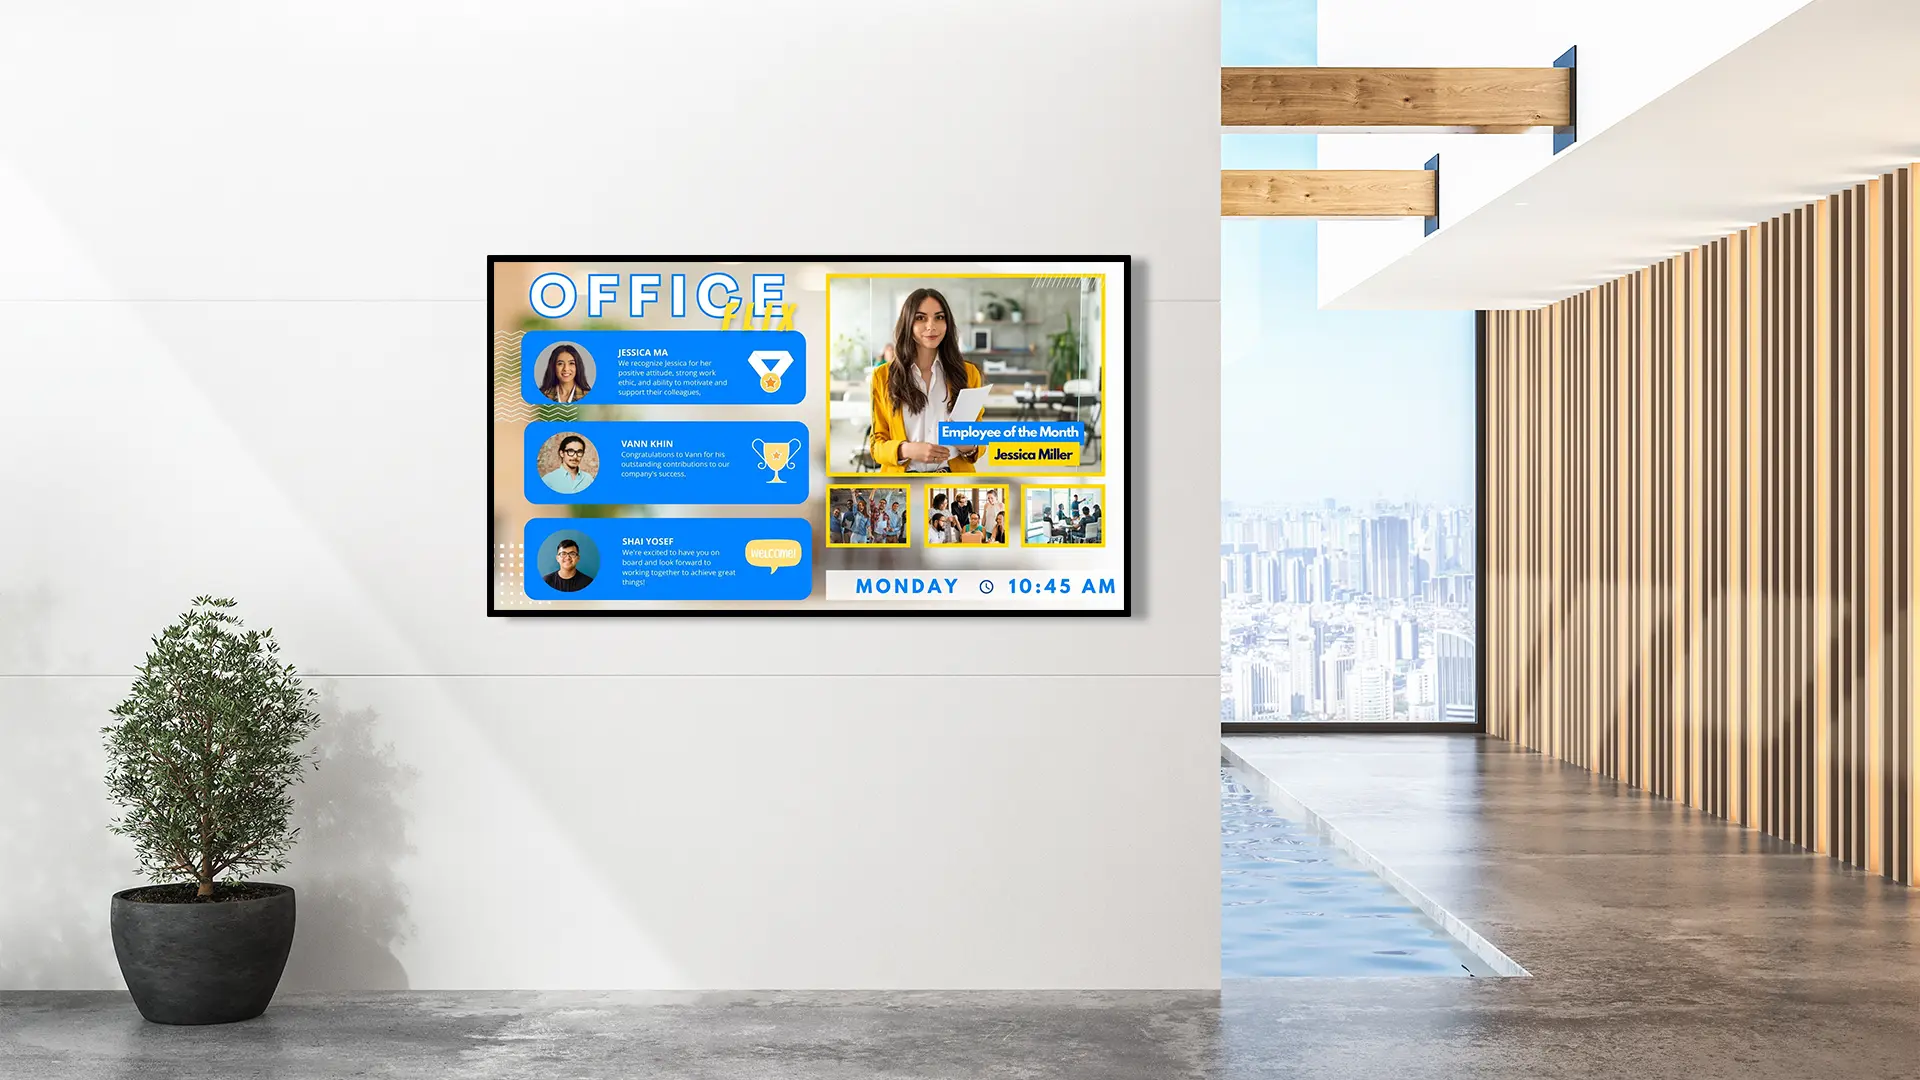 Digital Signage for Corporate Communication in New Zealand